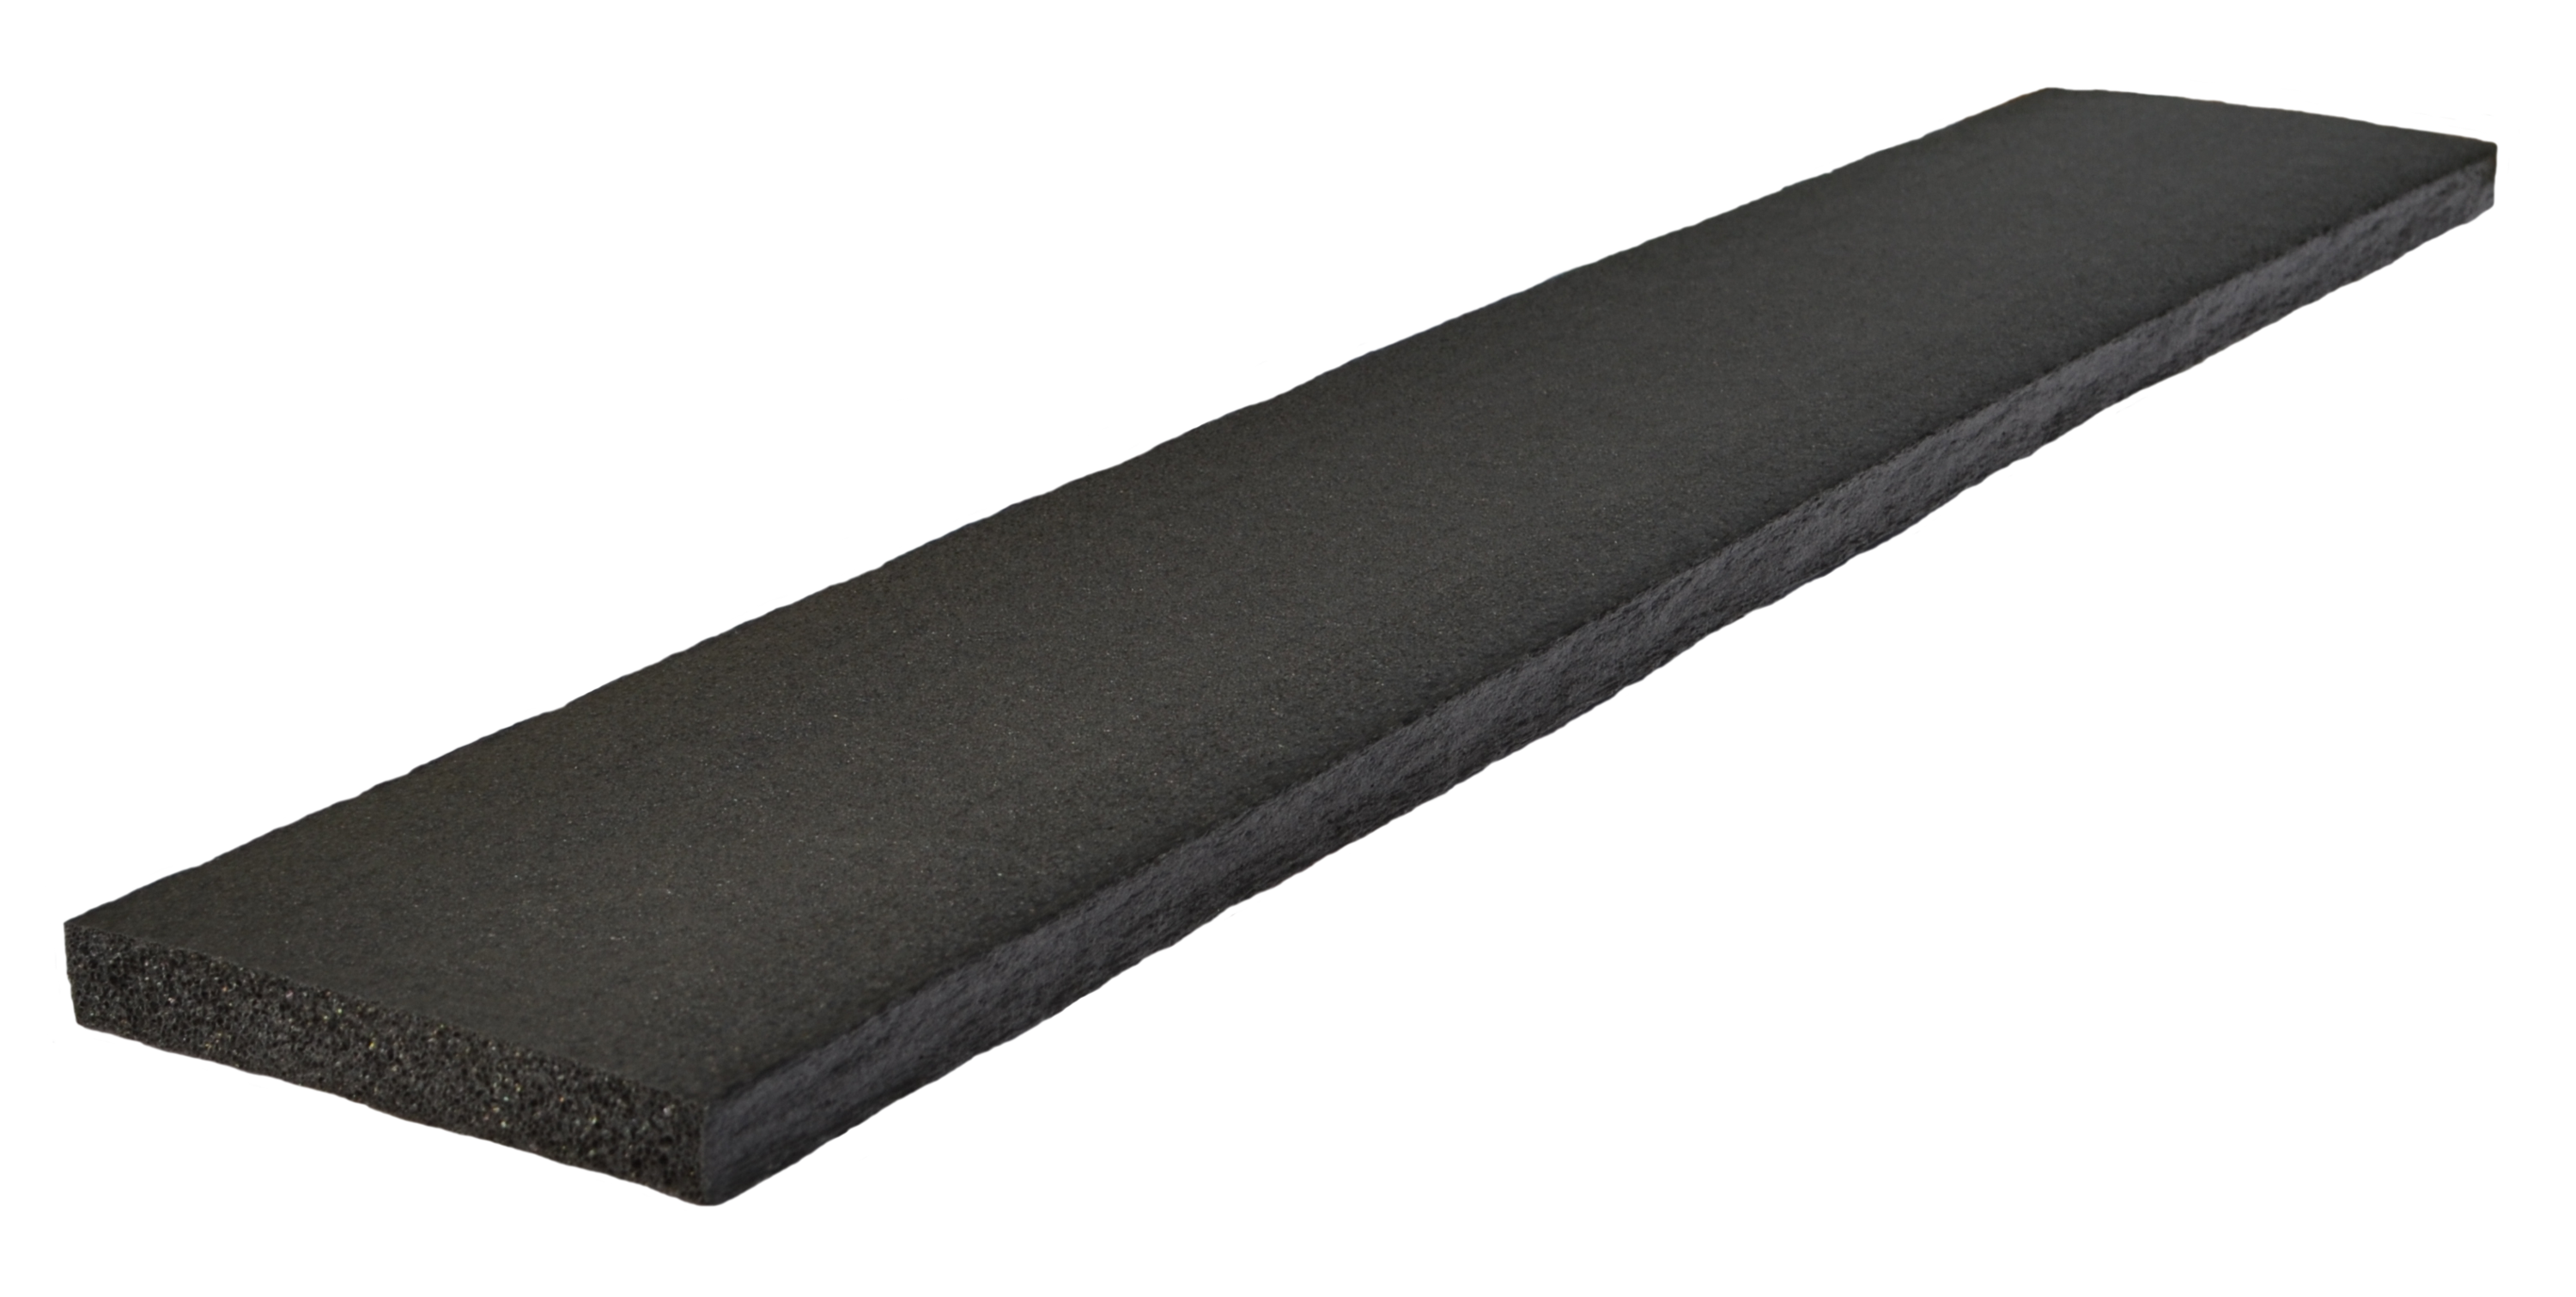 Today, installers have a new choice in Nomaflex, a closed-cell polypropylene foam expansion joint filler and form, which has been evaluated by the American Association of State Highway and Transportation Officials (AASHTO).